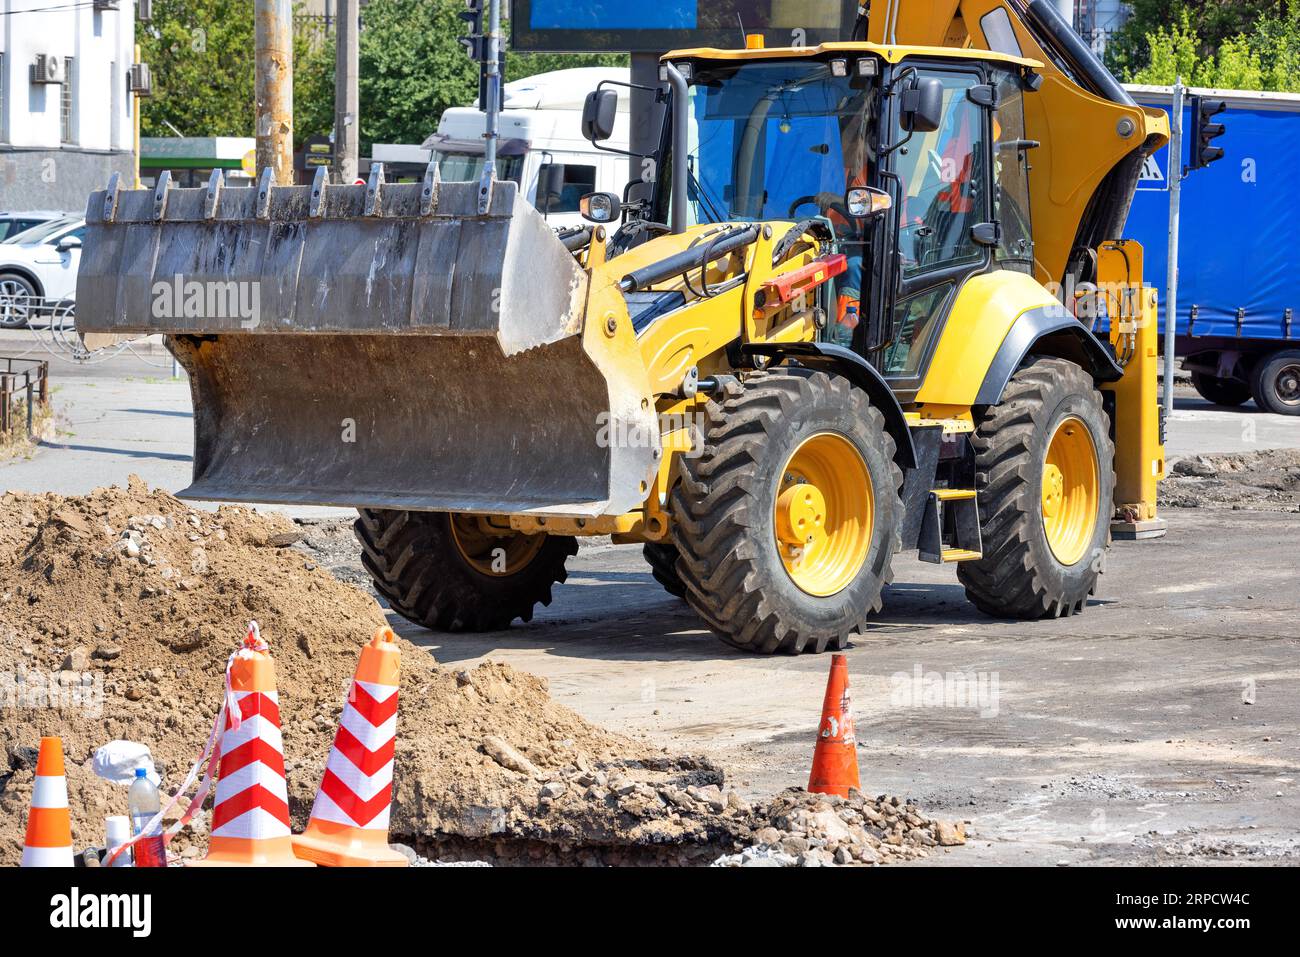 Tractor with a large hydraulic sliding bucket at a road work site on a bright sunny day. Copy space. Stock Photo